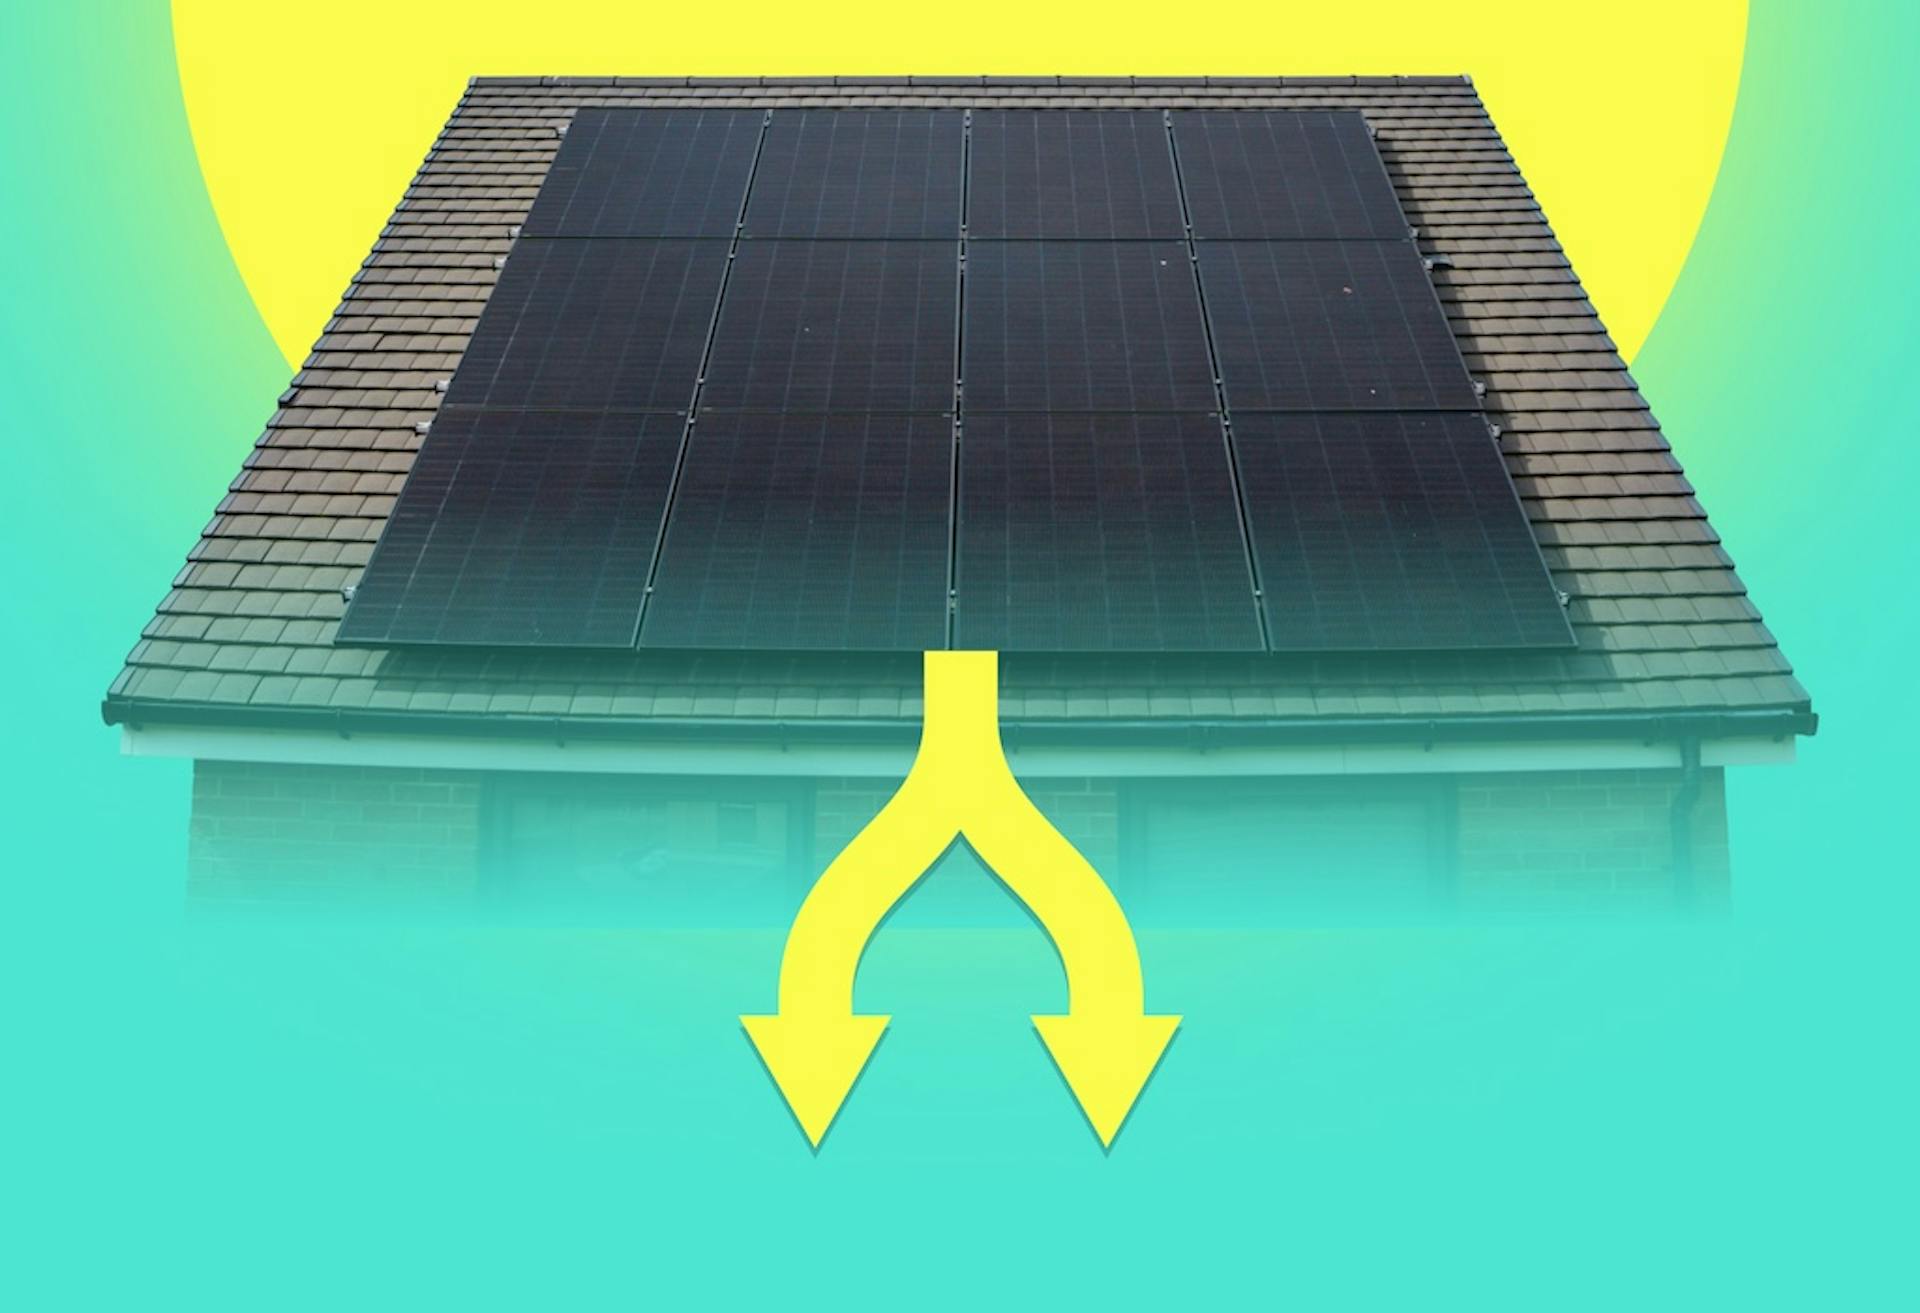 12 black solar panels on a roof, yellow cartoon sun in the background, two yellow arrows pointing down from the panels